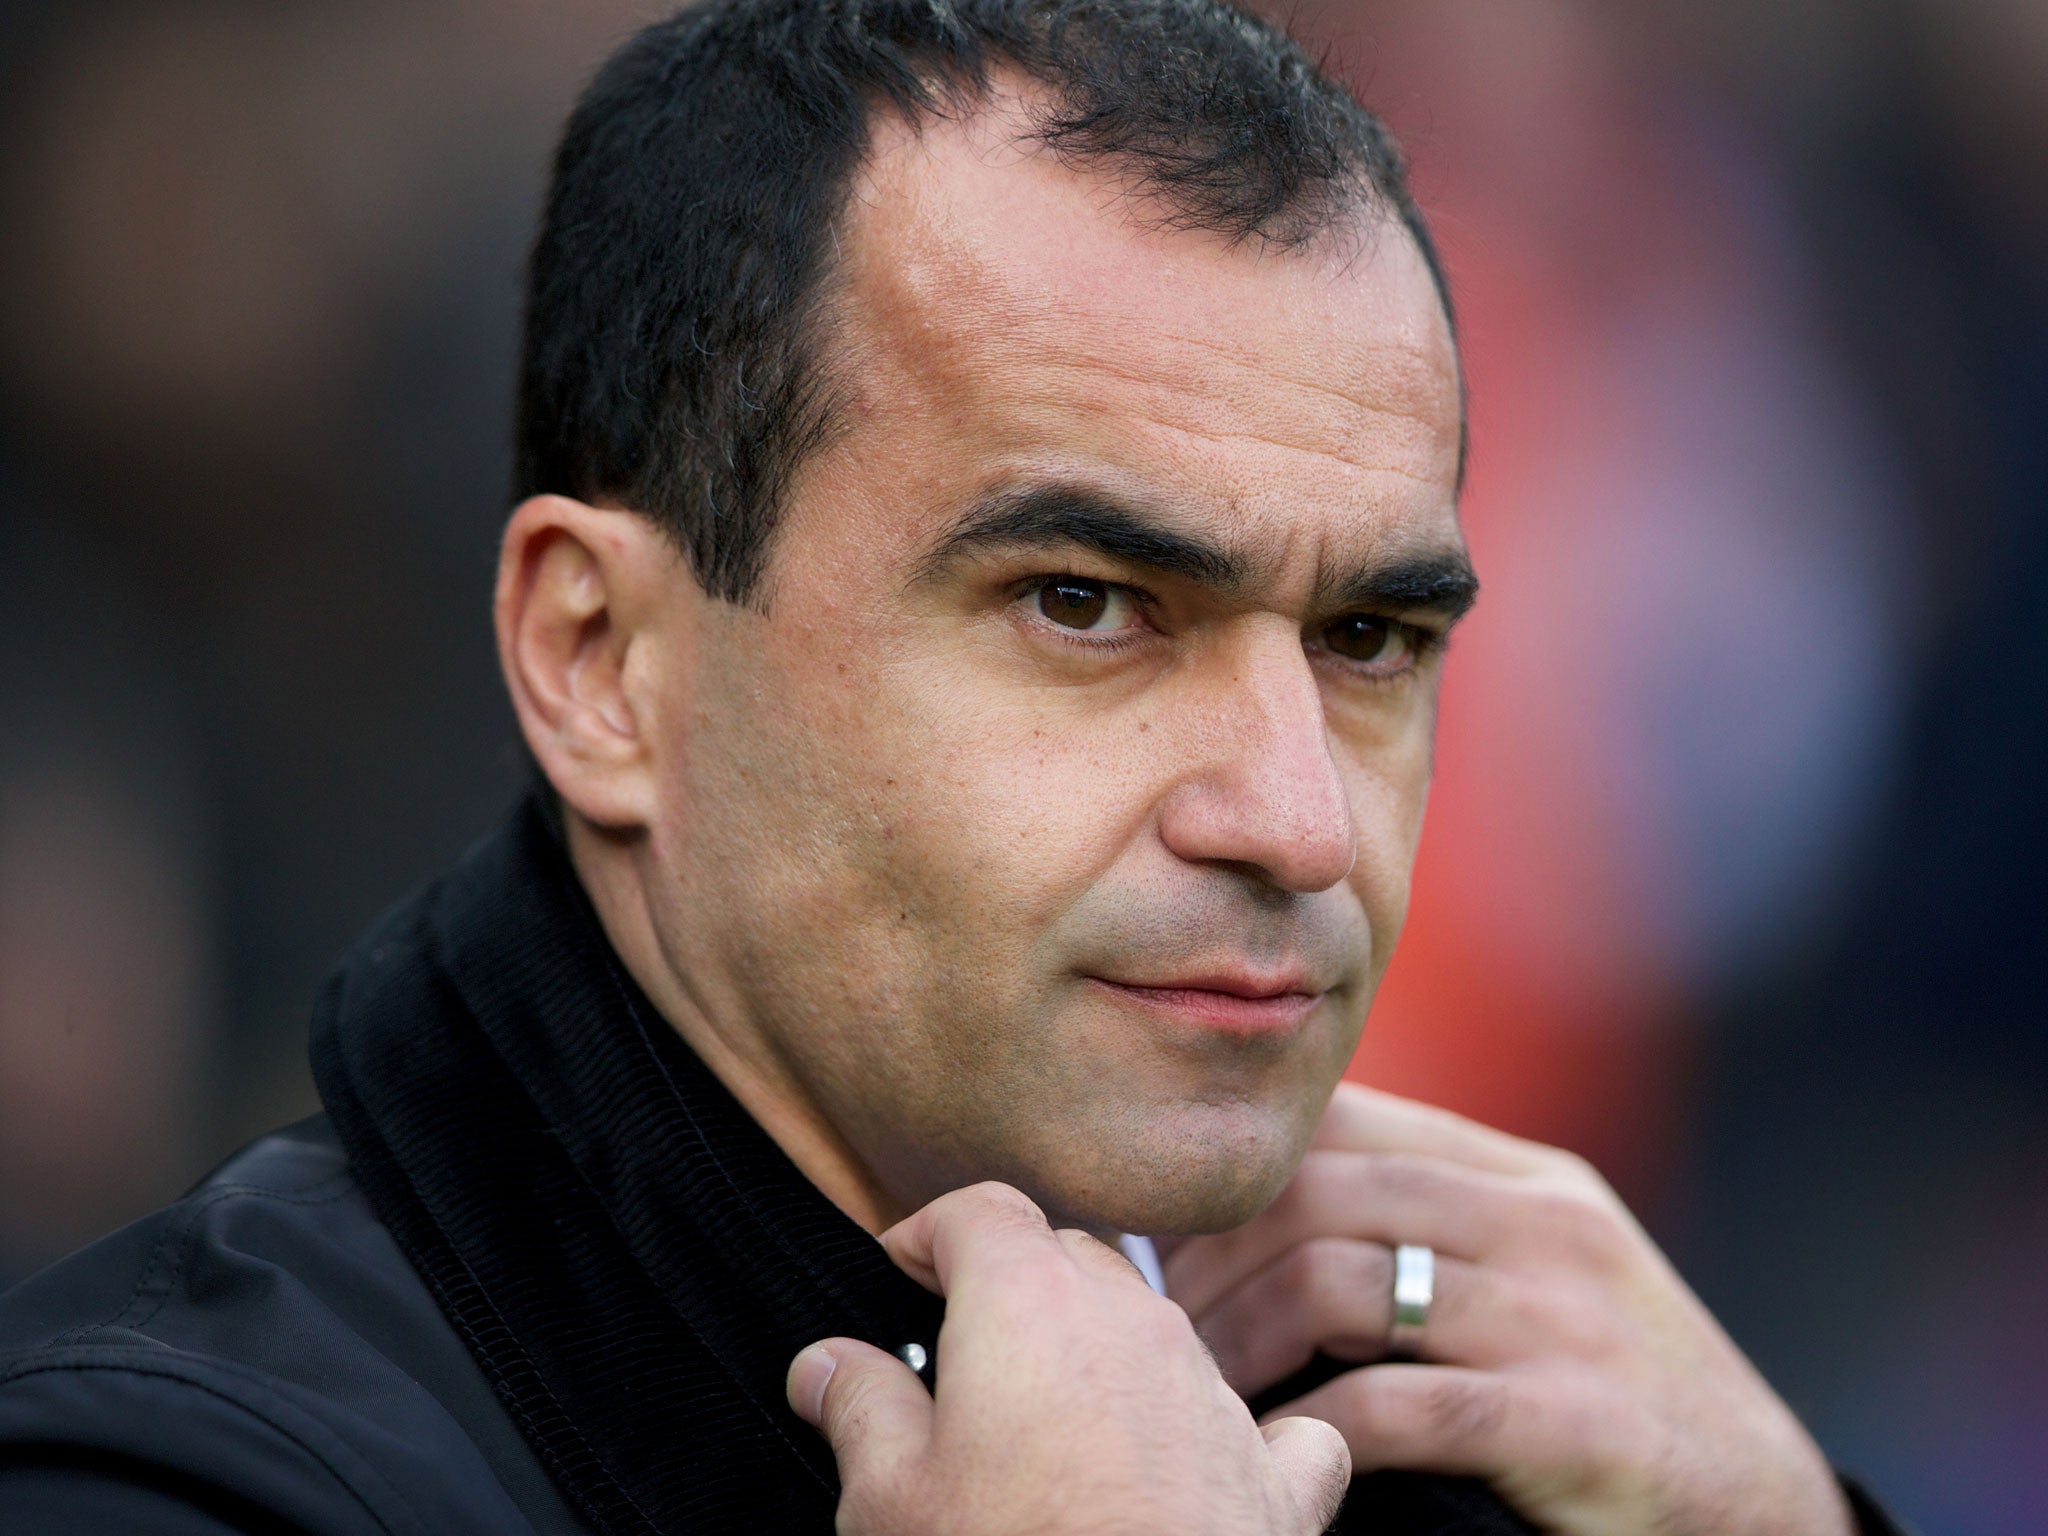 Roberto Martinez has achieved in four months the transformation in football culture at Everton which it took Brendan Rodgers a year to accomplish at Liverpool